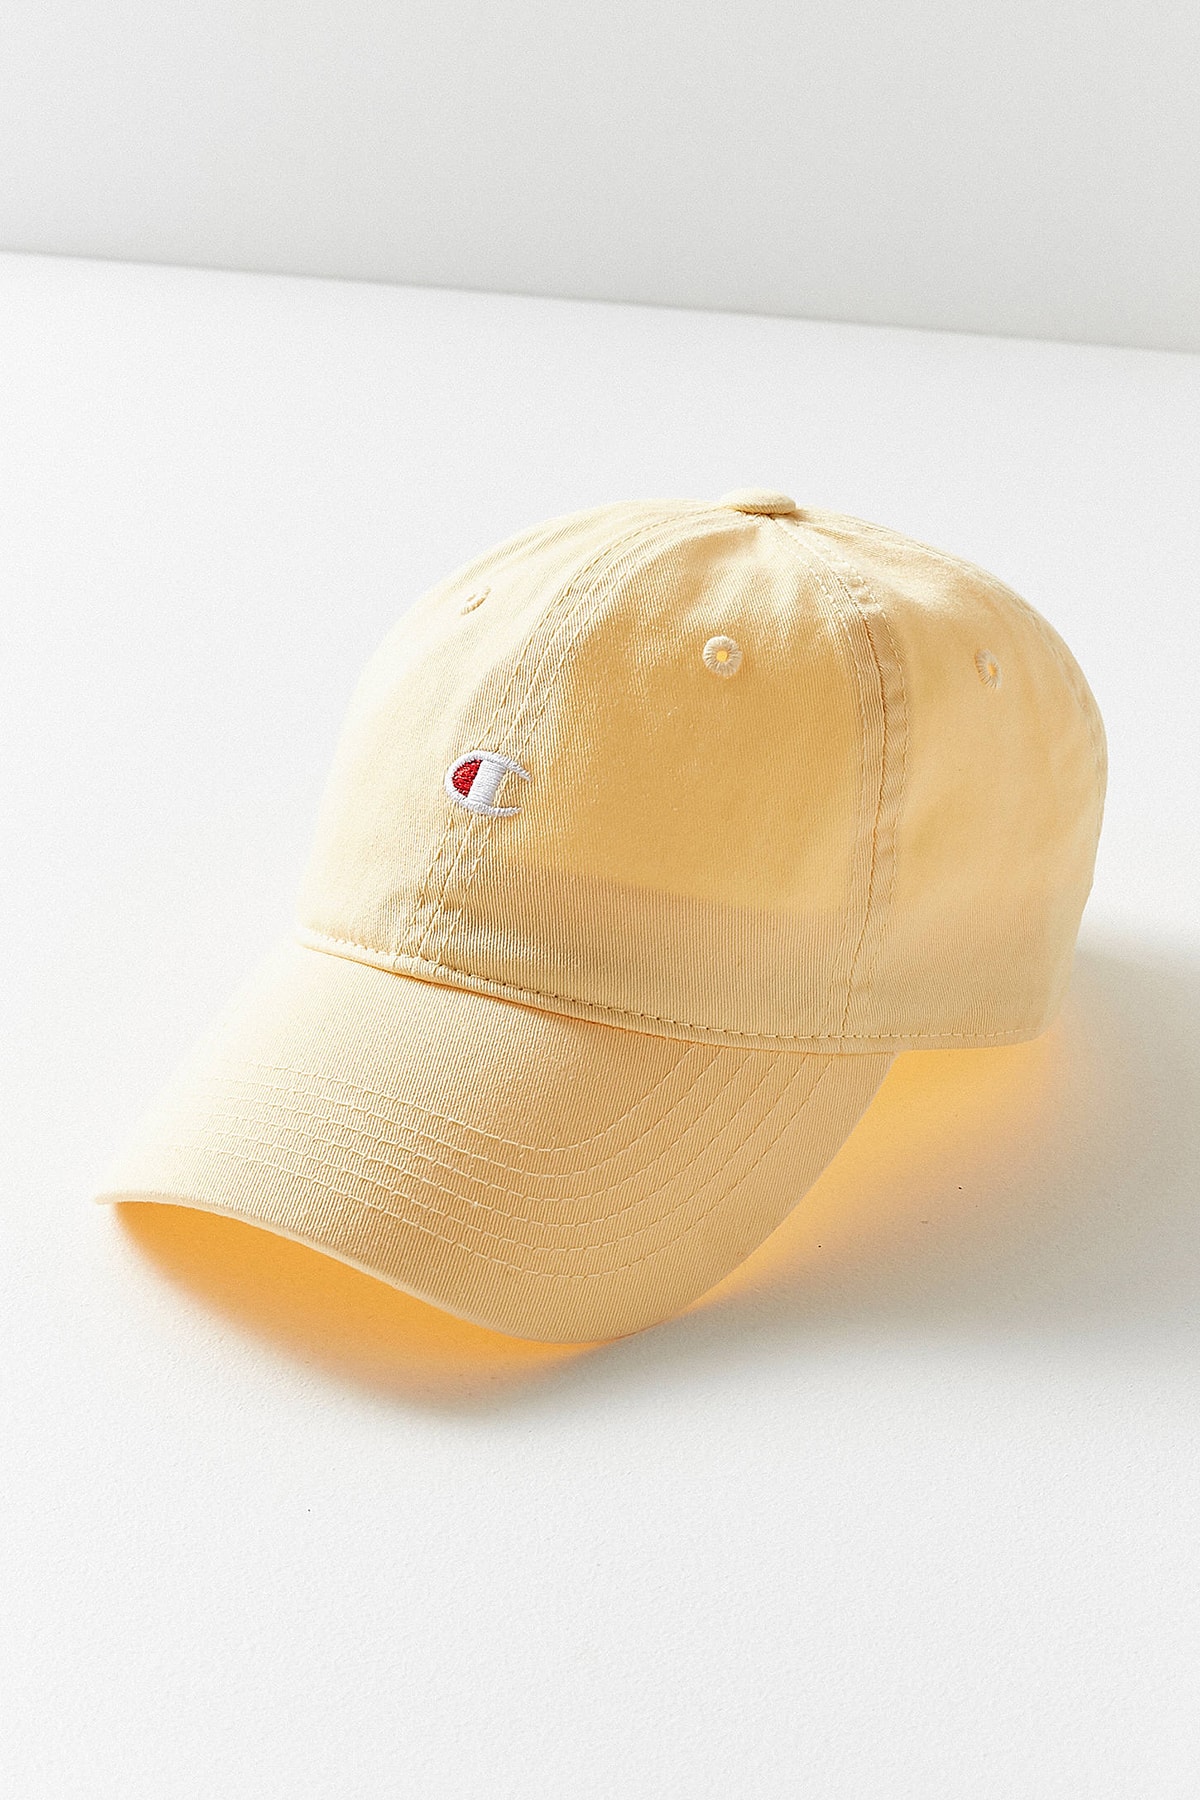 Champion Urban Outfitters Washed Twill Baseball Hat Cap Yellow Logo